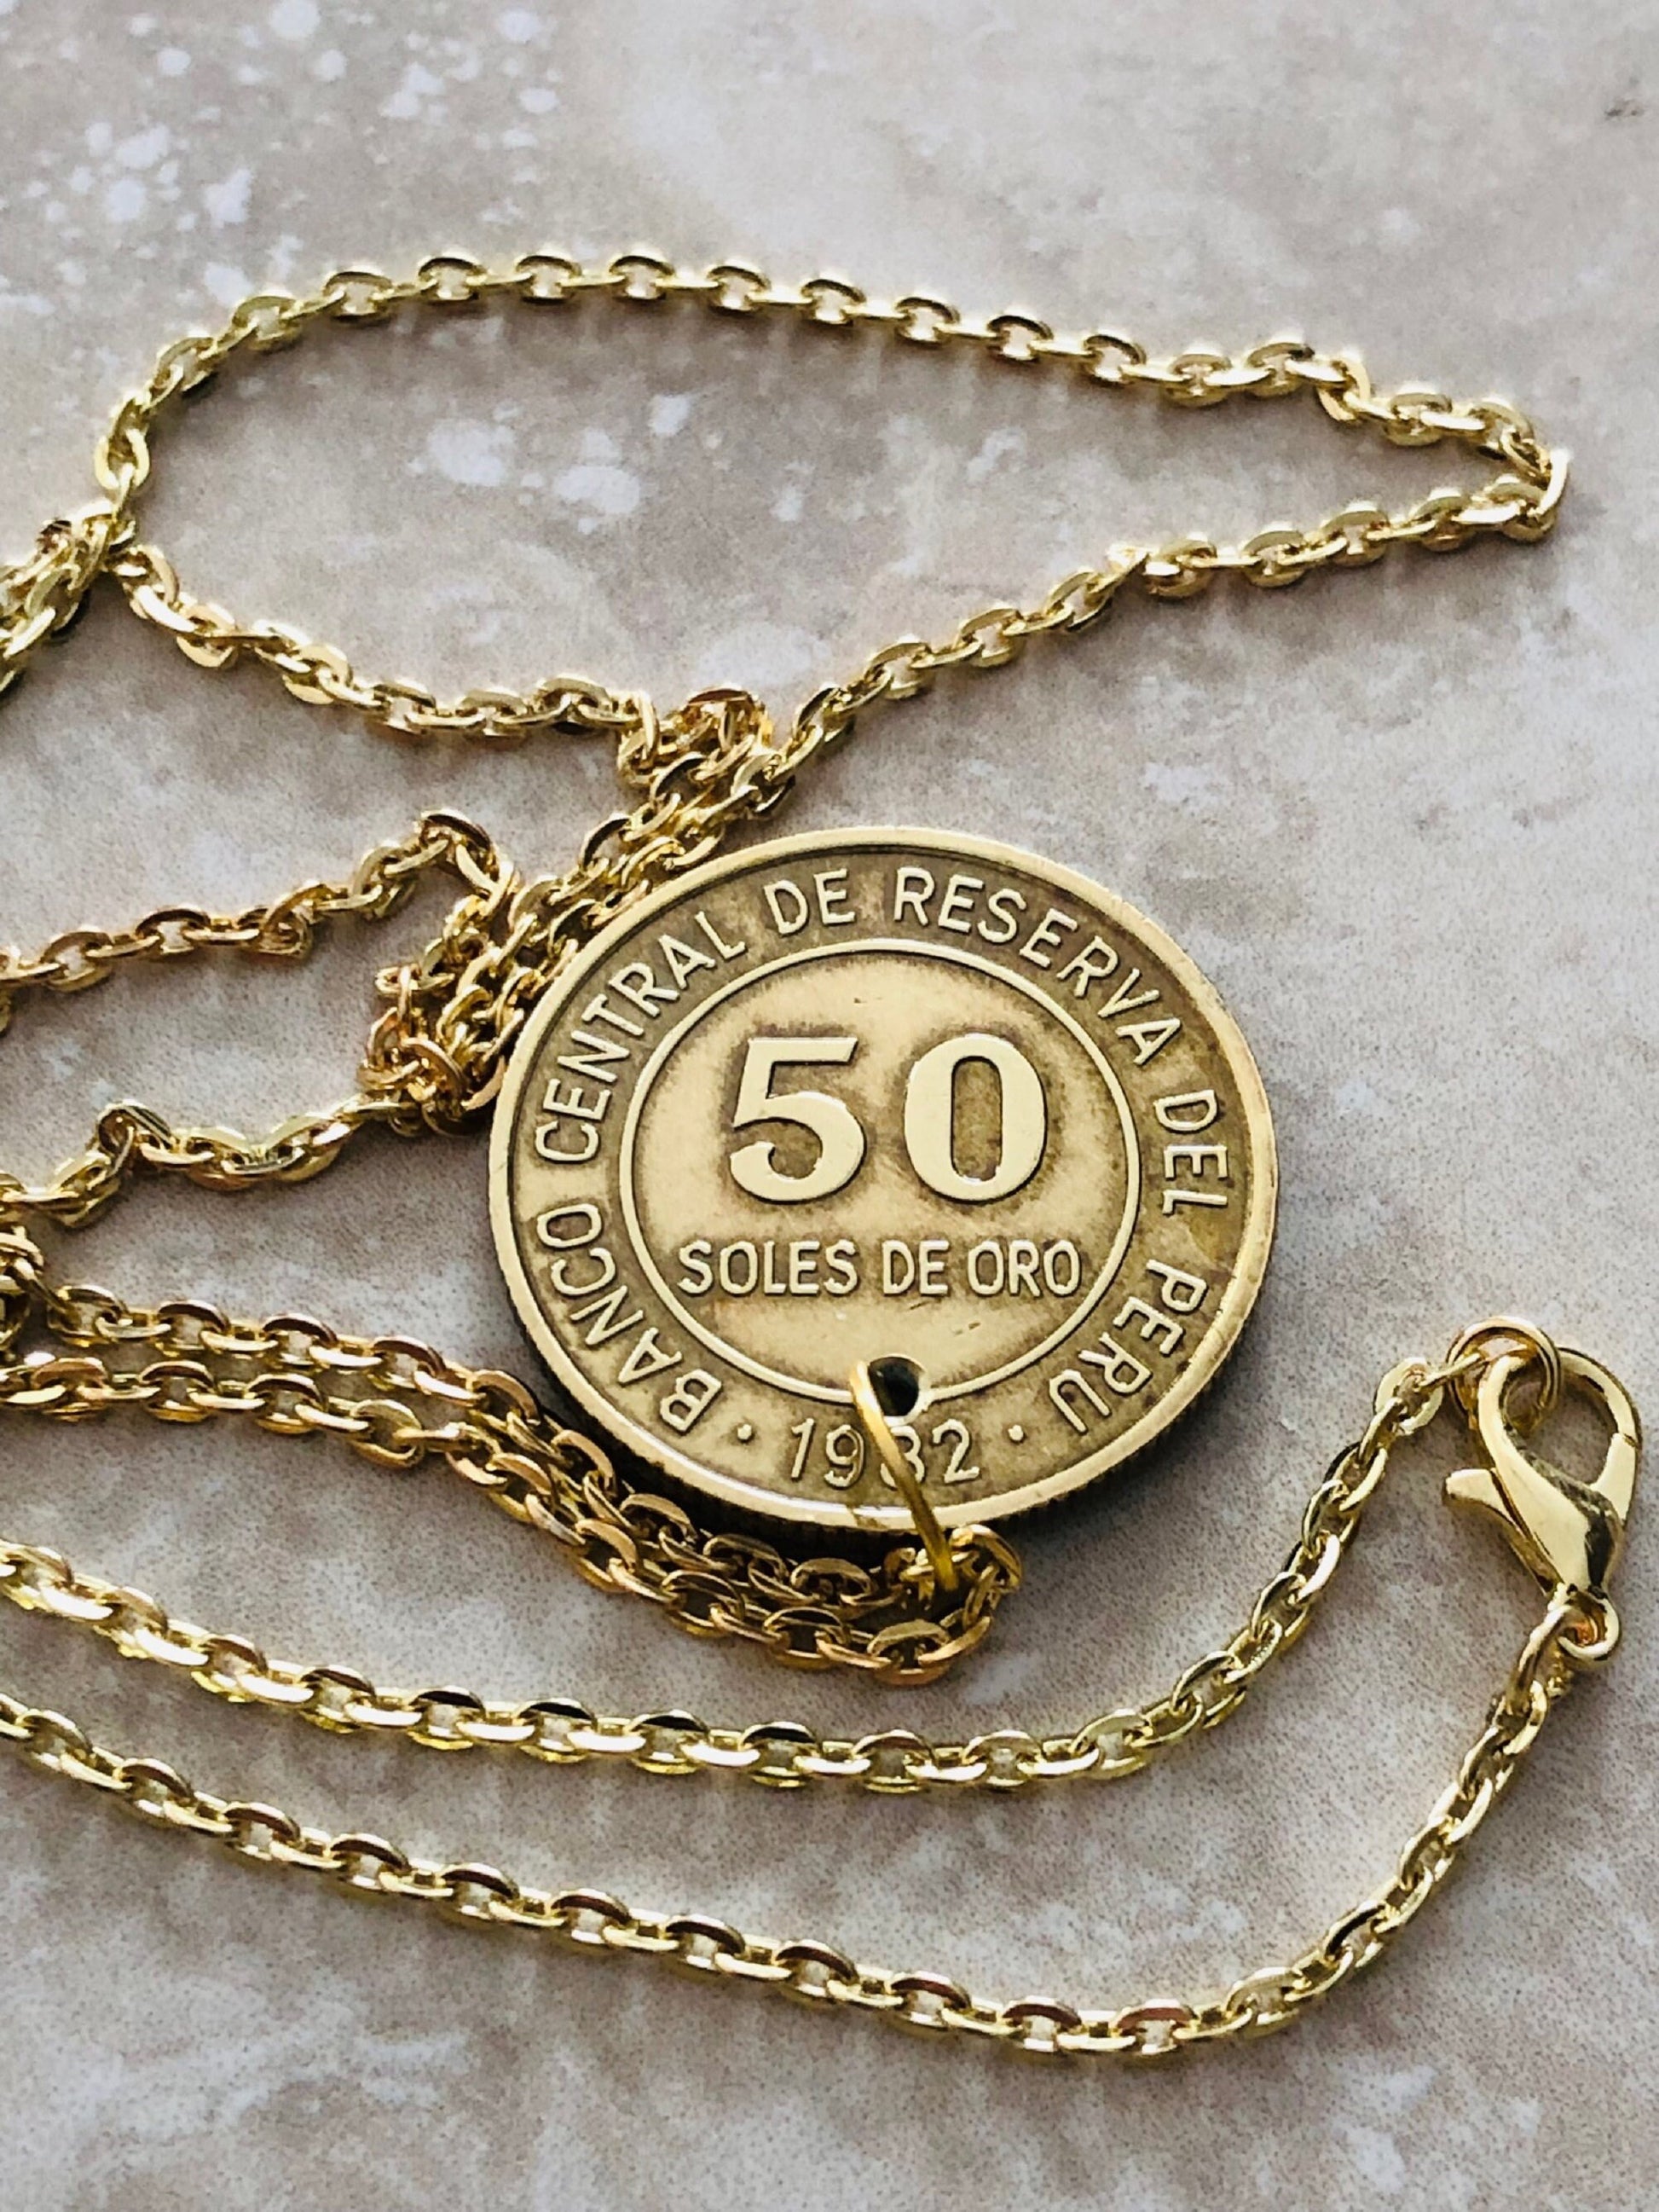 Peru Coin Pendant Necklace Peruvian 50 Sol De Oro Personal Necklace Old Handmade Jewelry Gift Friend Charm For Him Her World Coin Collector